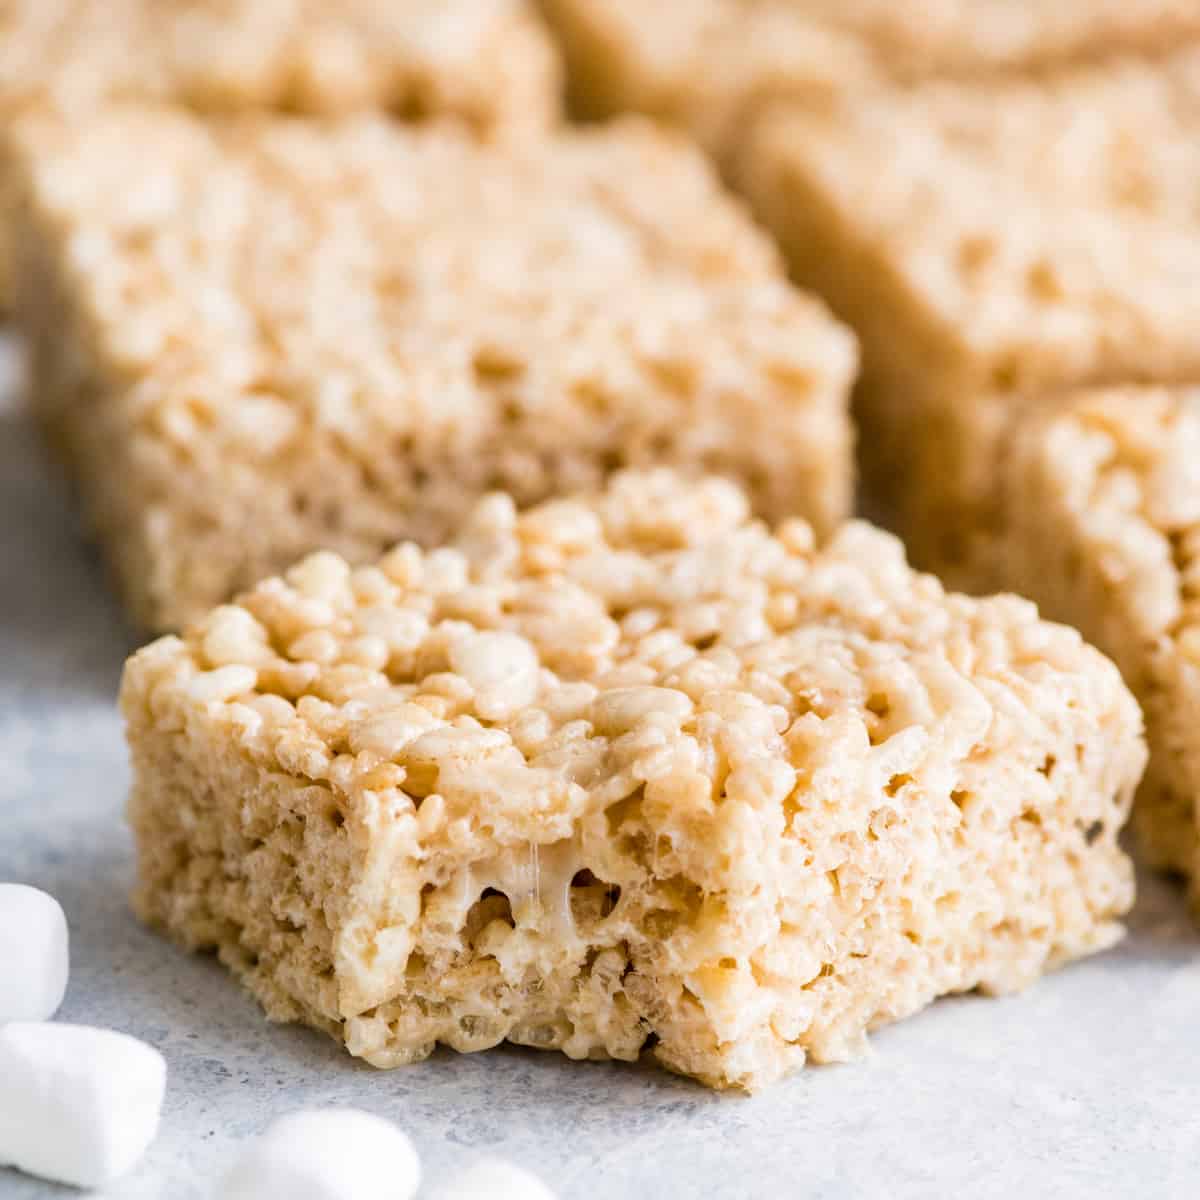 front view of a Rice Crispy Treat with a bite taken out of it, and 5 other rice crispy treats in the background and mini marshmallows in the foreground.